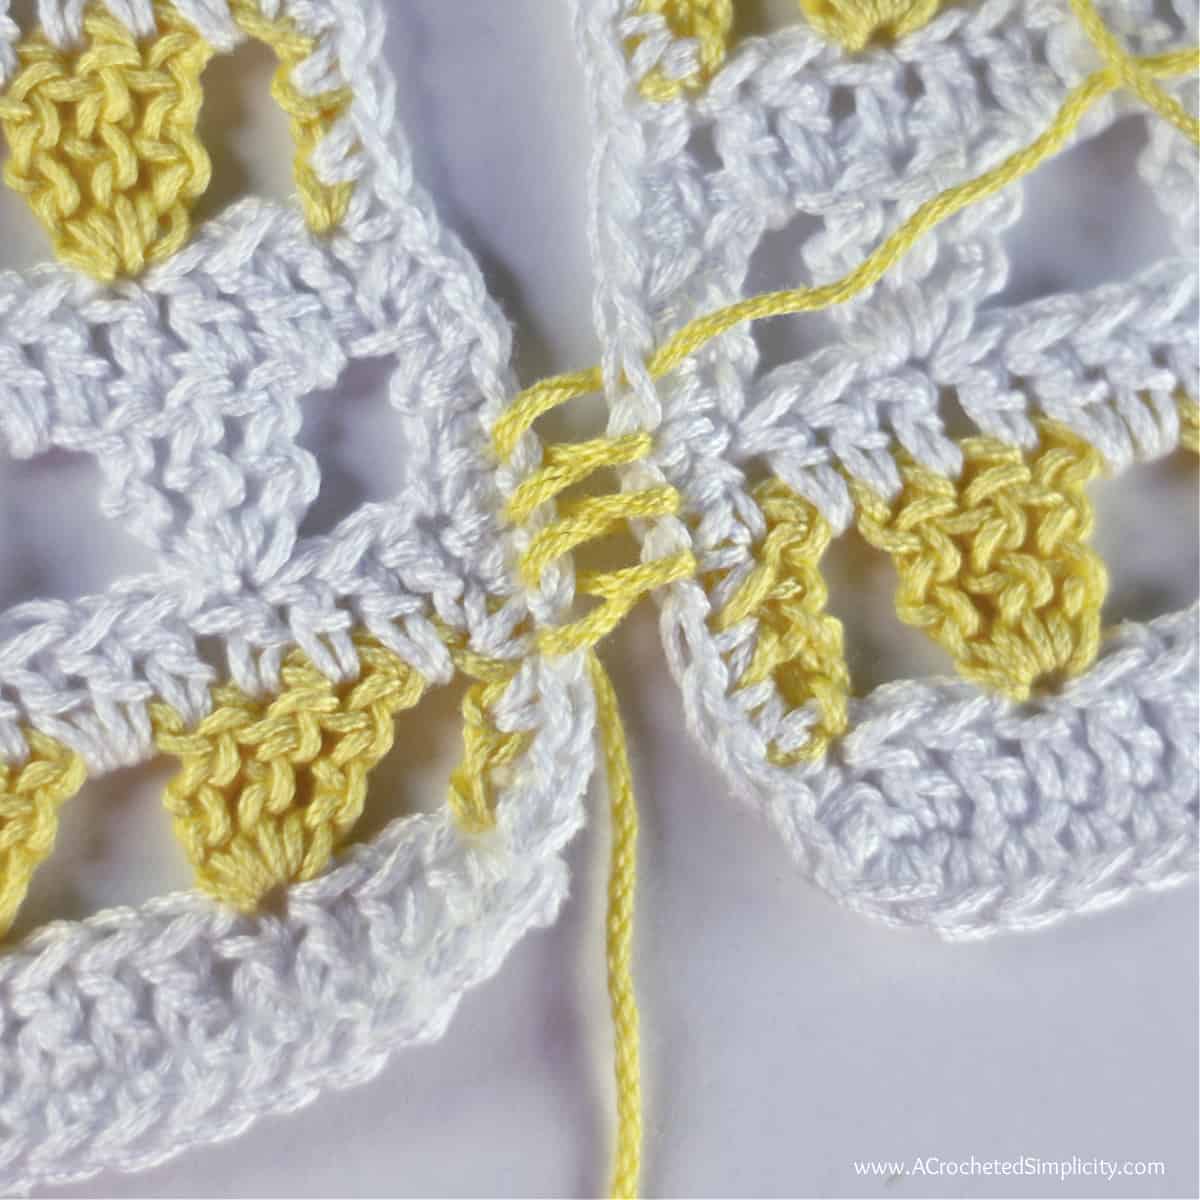 This photo shows the mattress stitch crochet seam after a few stitches are worked back and forth, before being pulled tight.